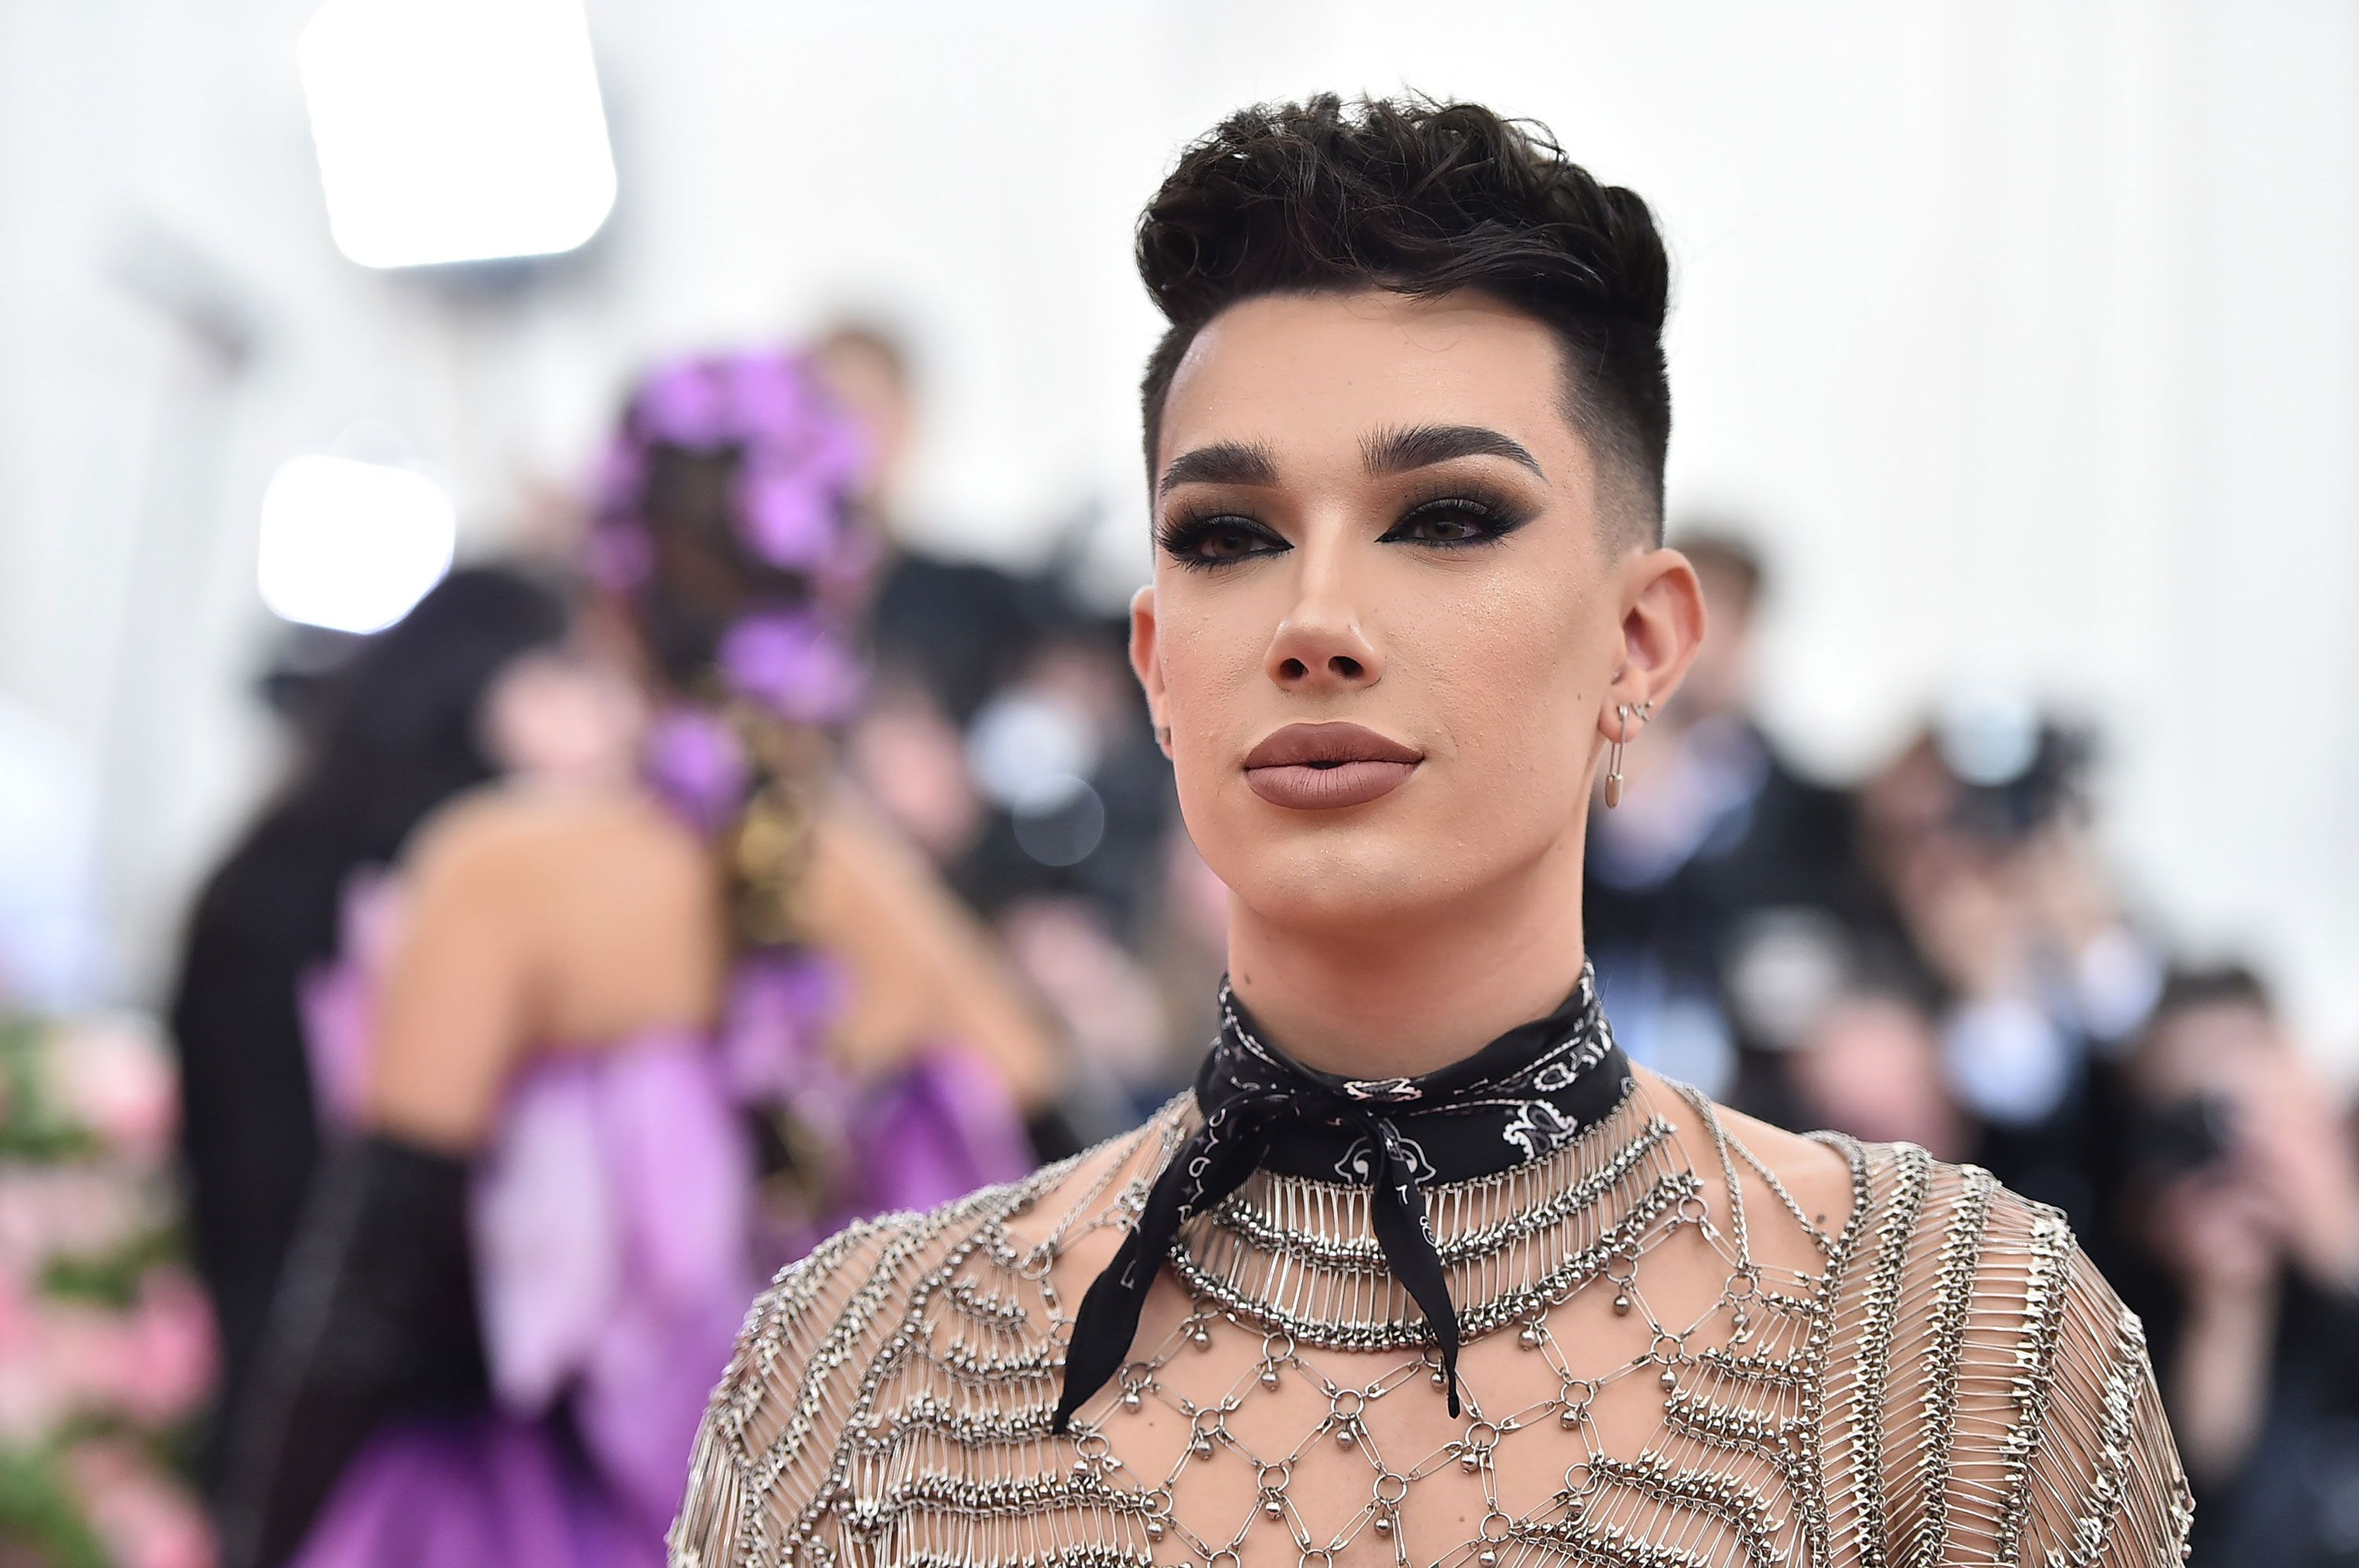 A Timeline of James Charles Allegations and Controversies